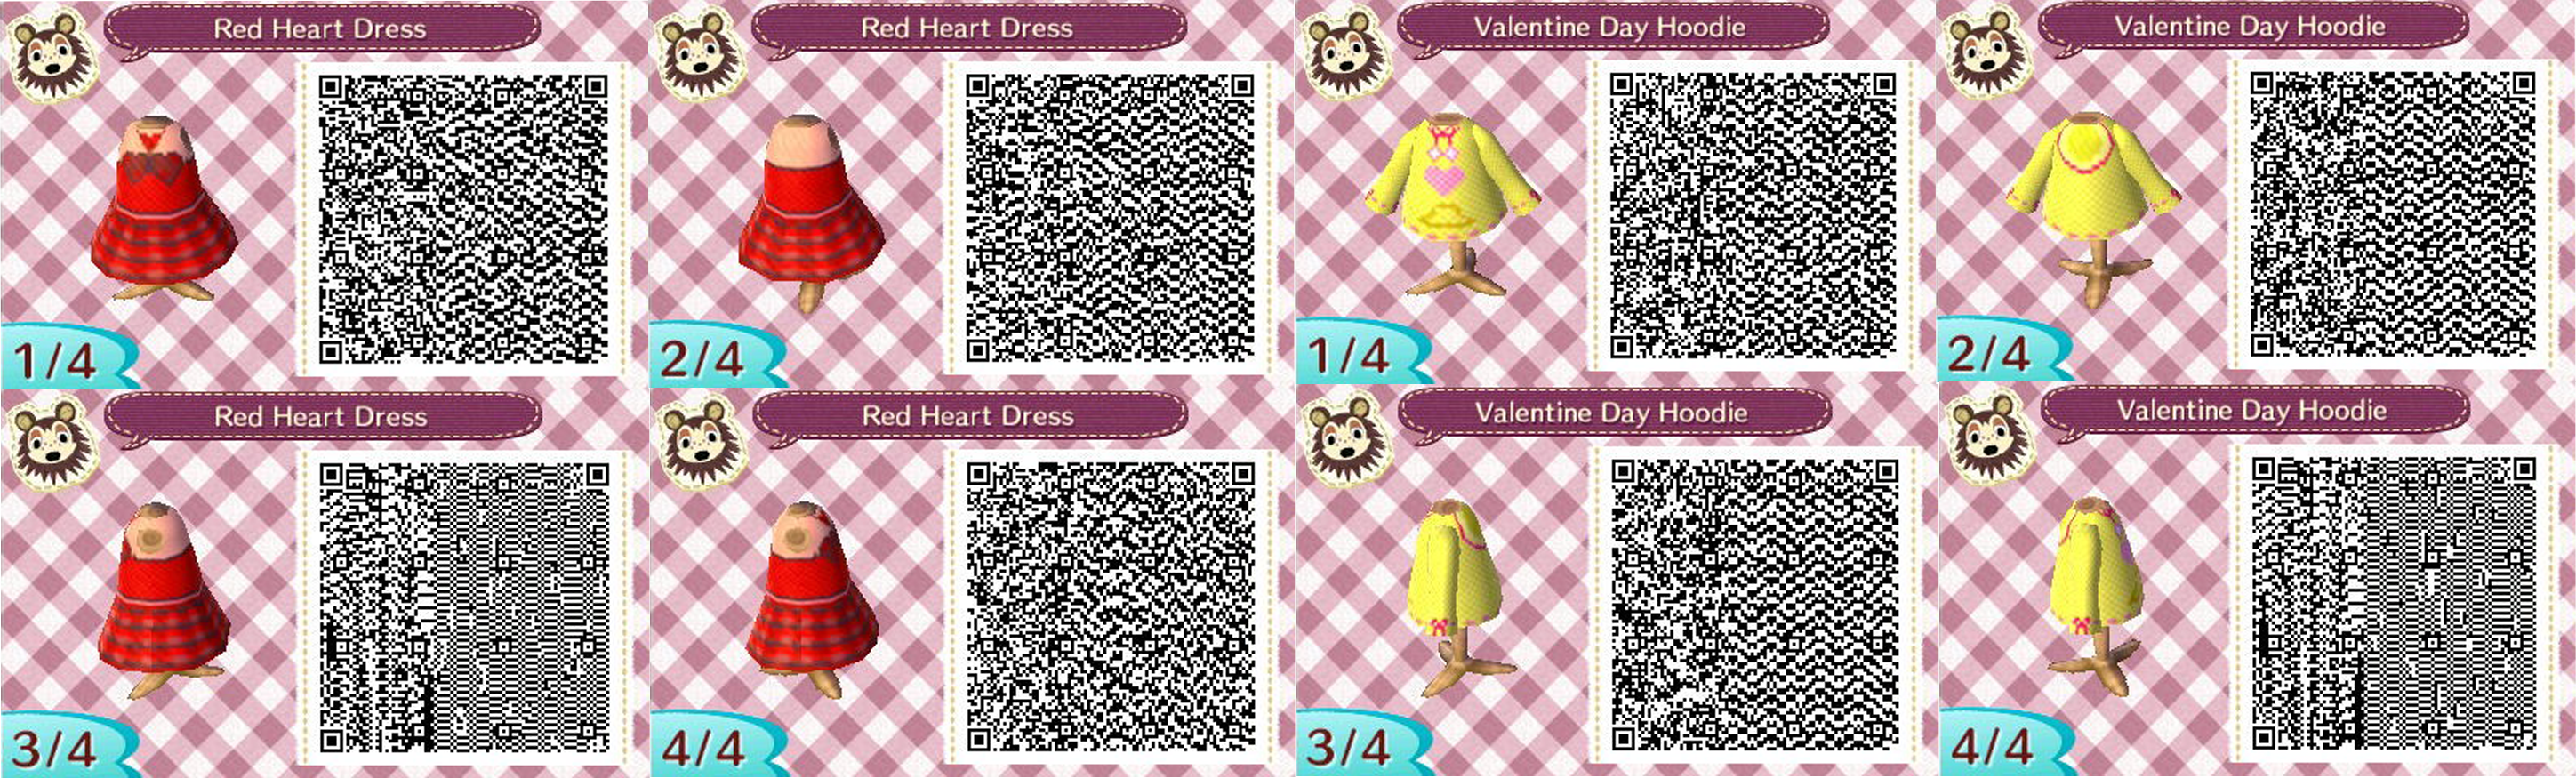 Acnl Valentine S Day Outfits By Qr Codez